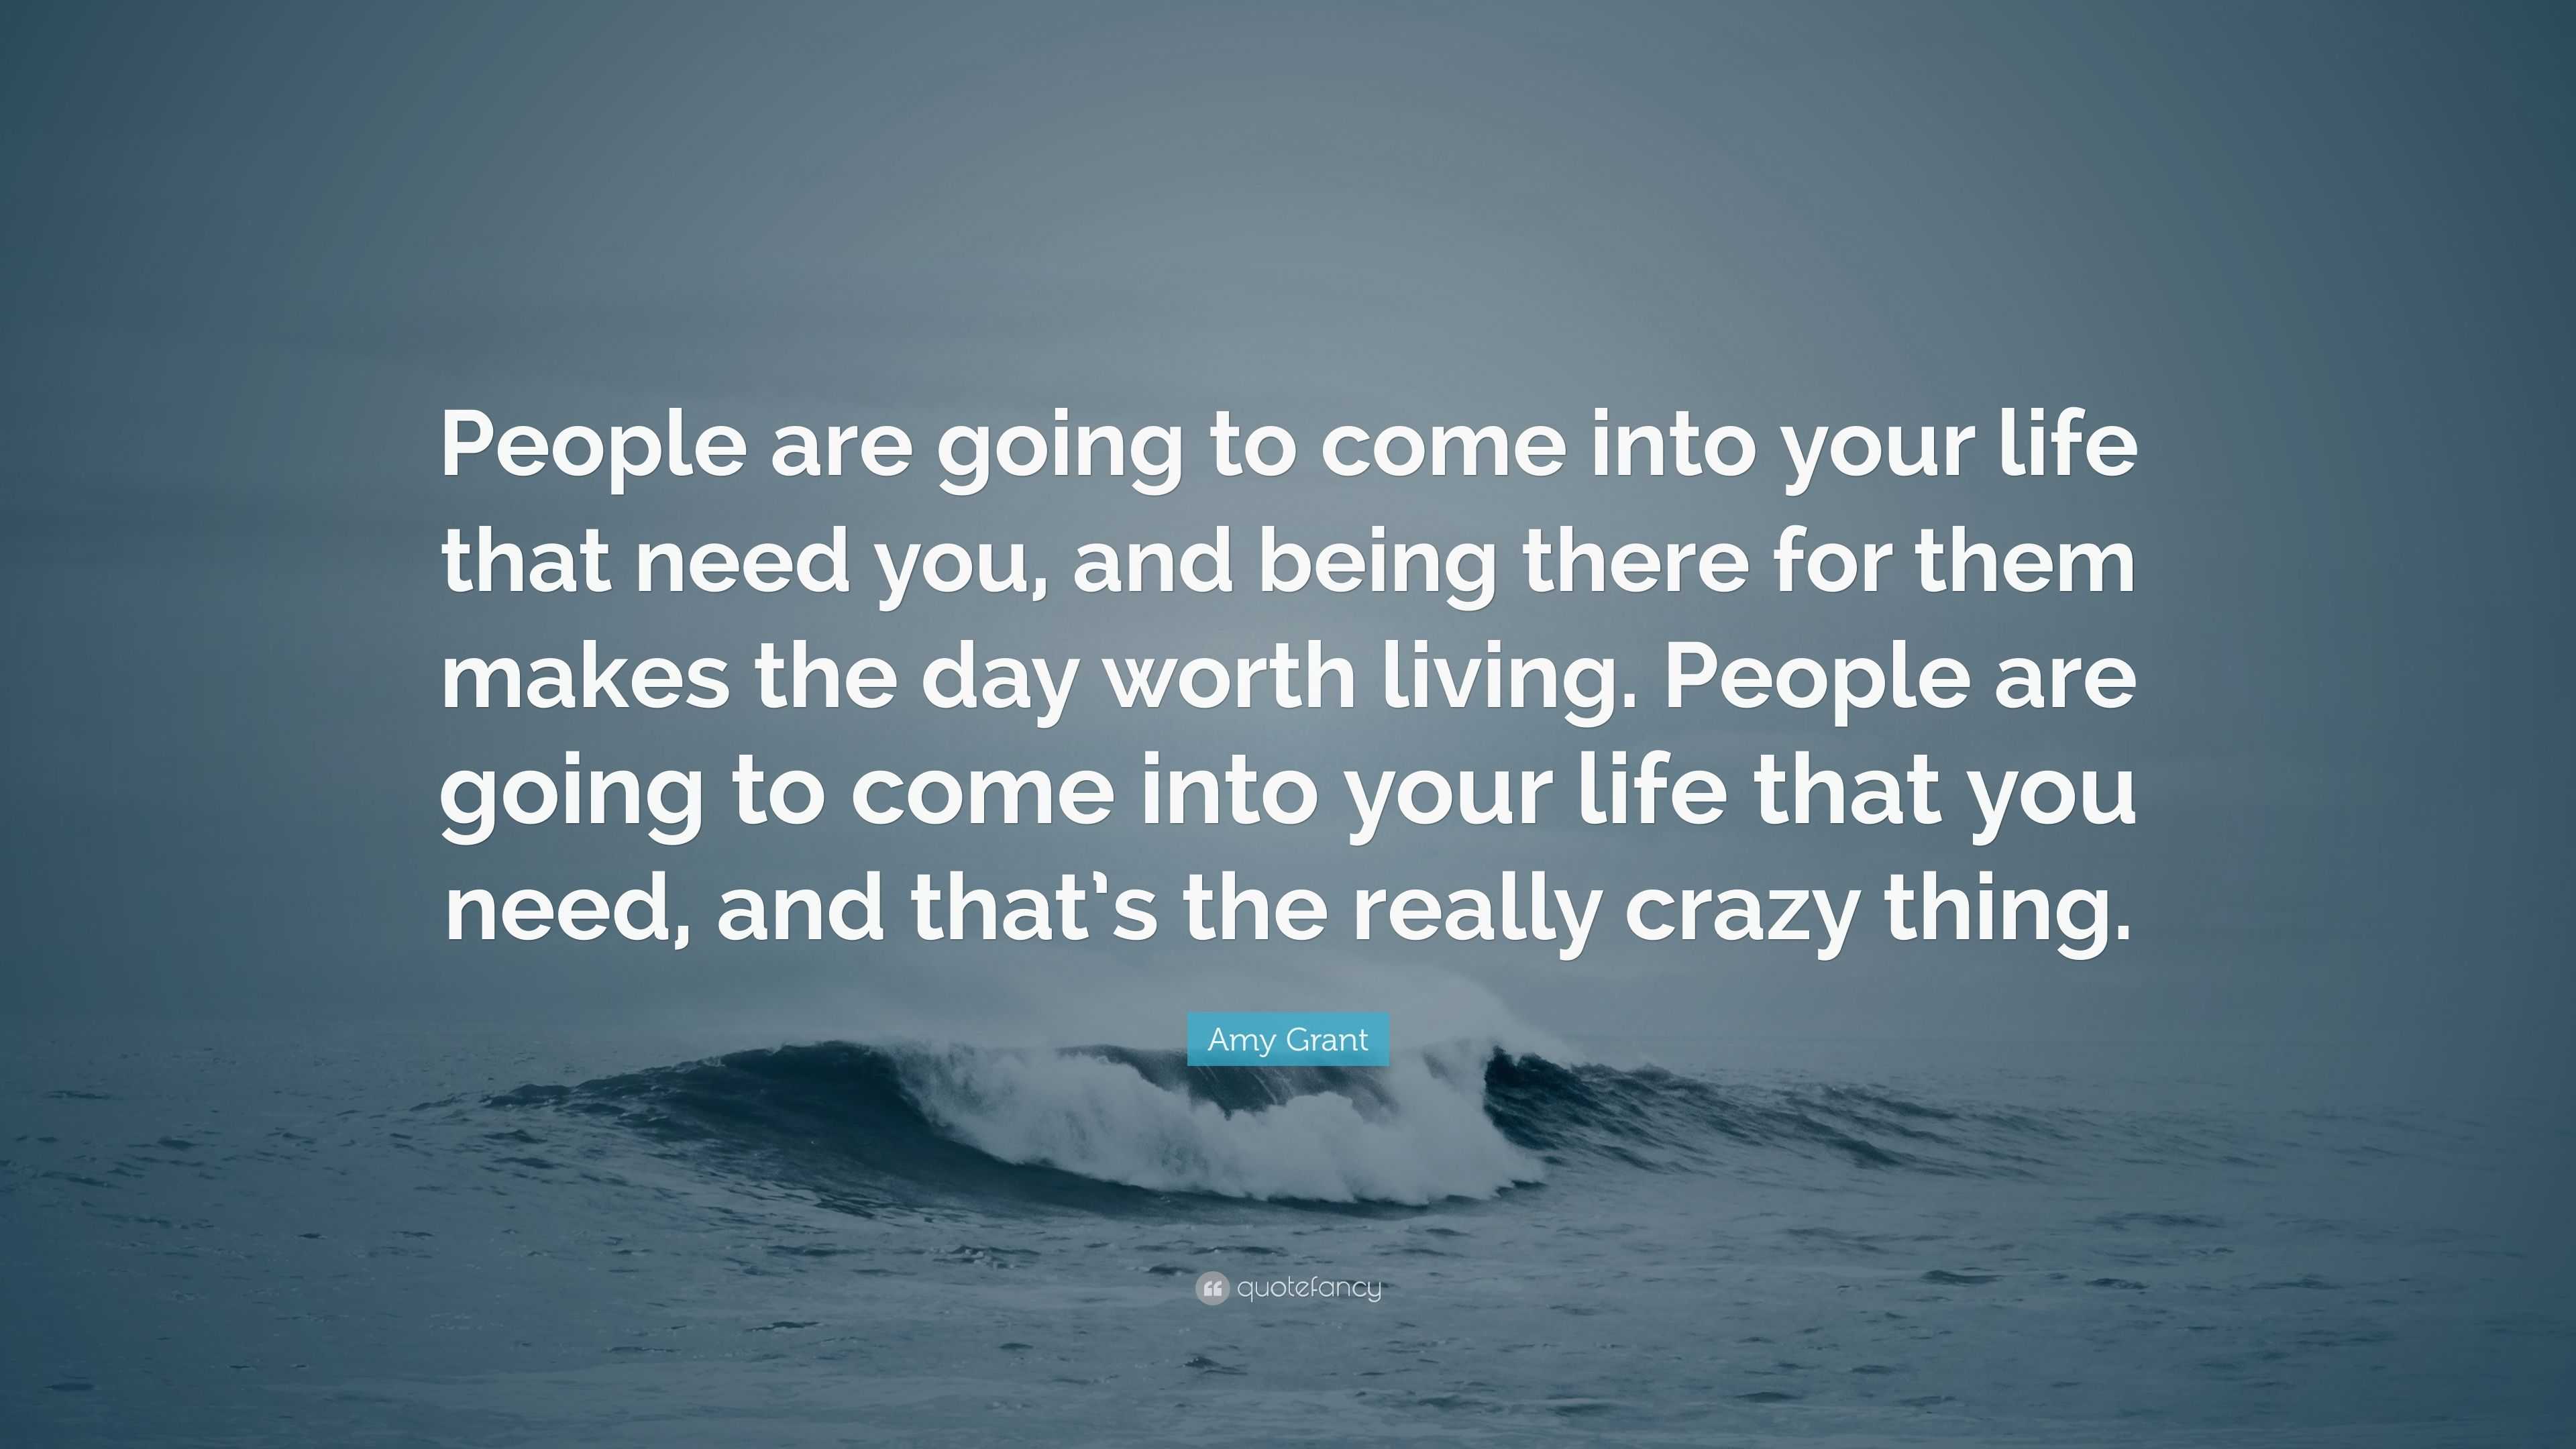 Amy Grant Quote: "People are going to come into your life that need yo...